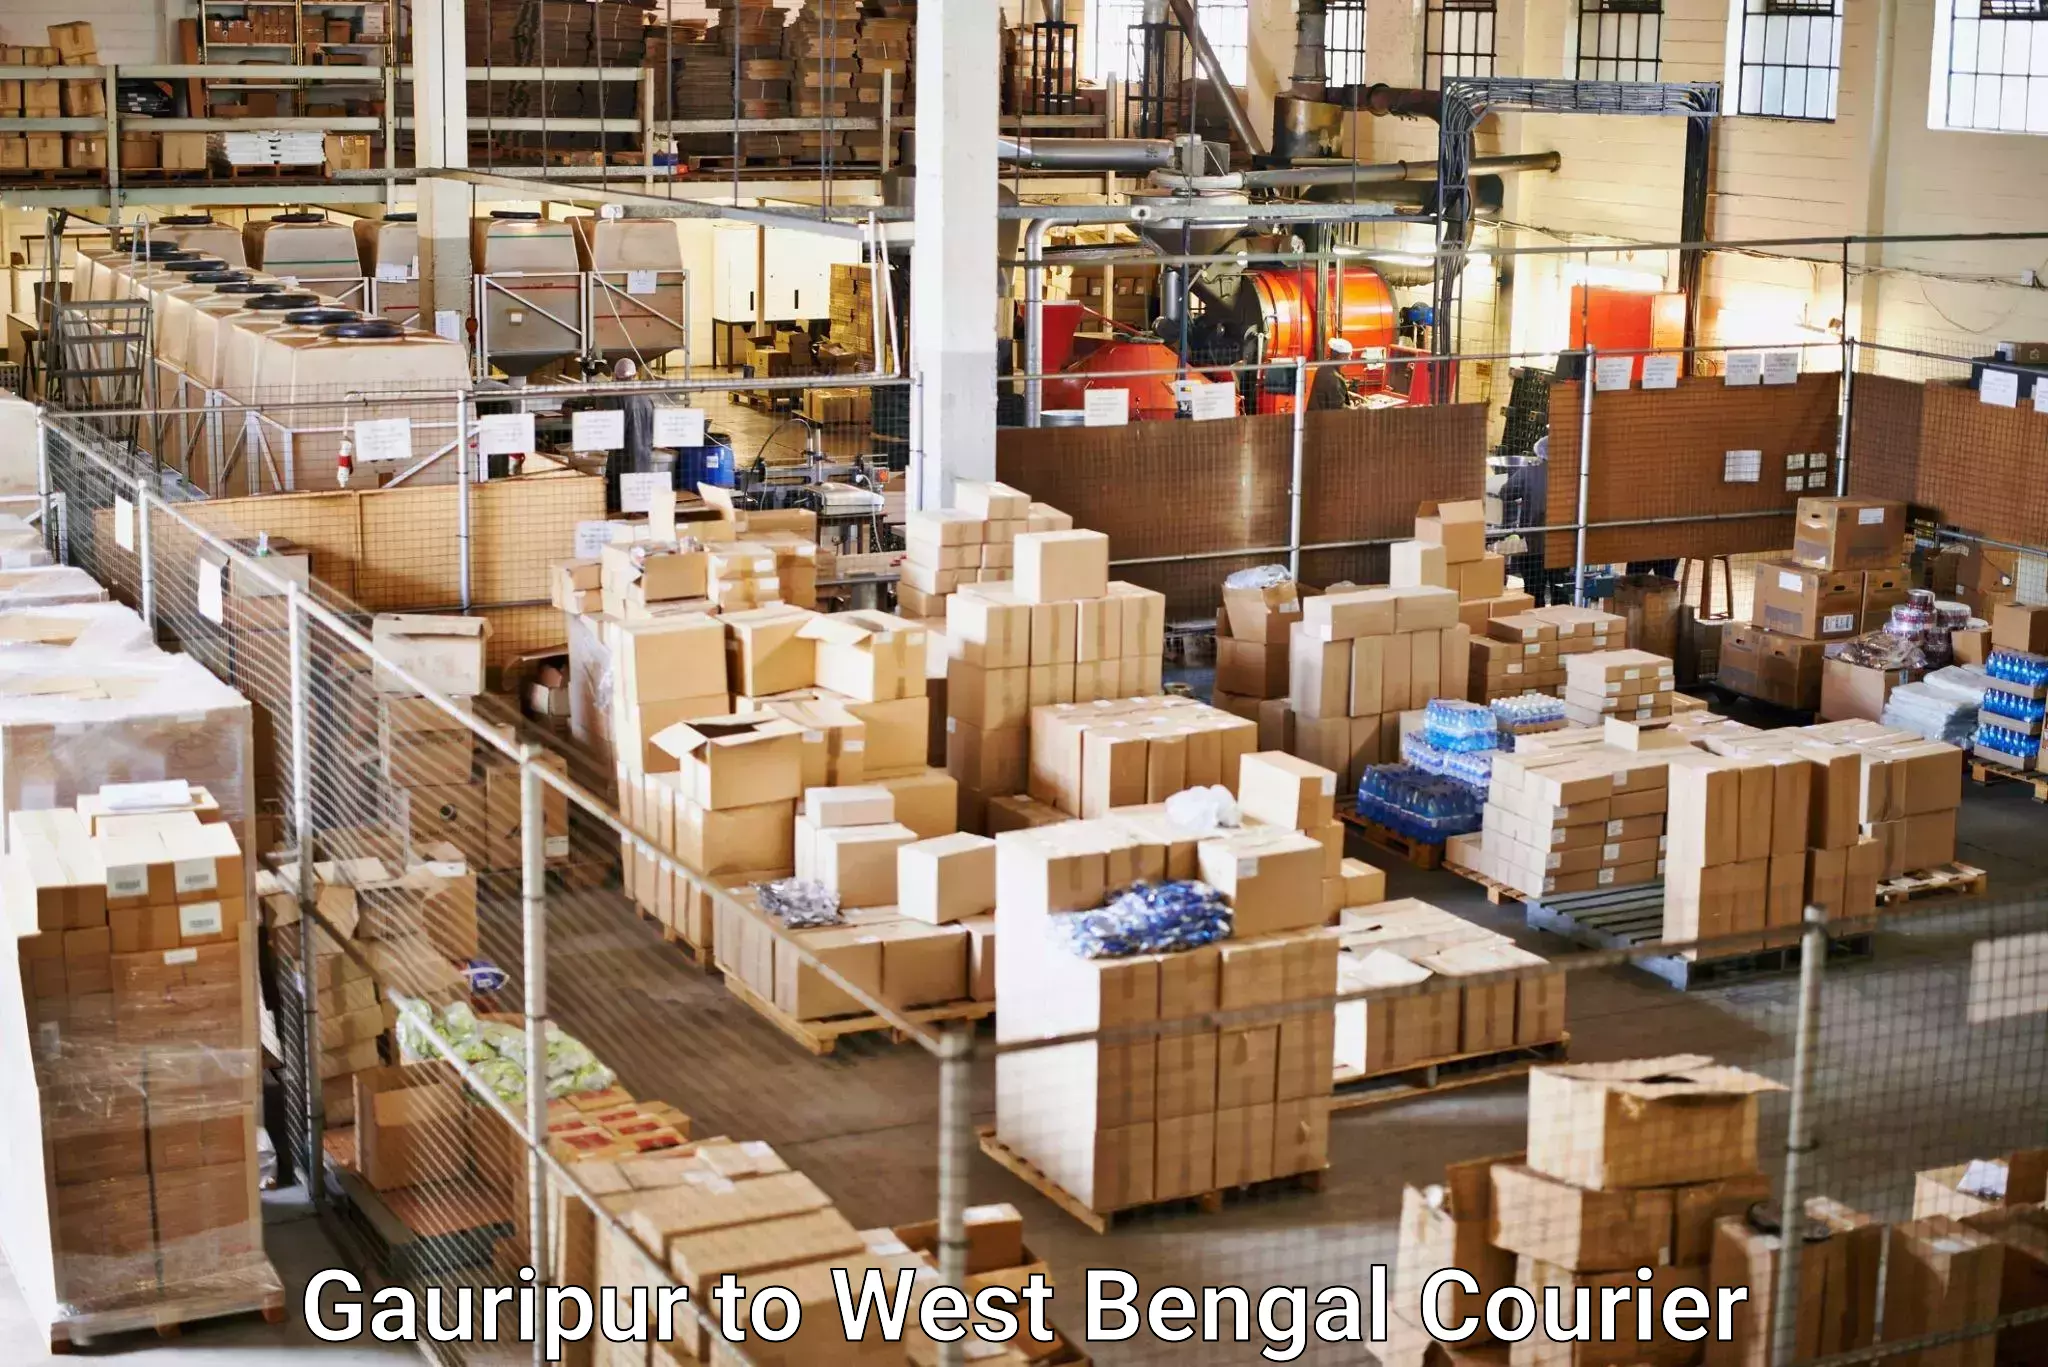 Global freight services Gauripur to Kaliachak